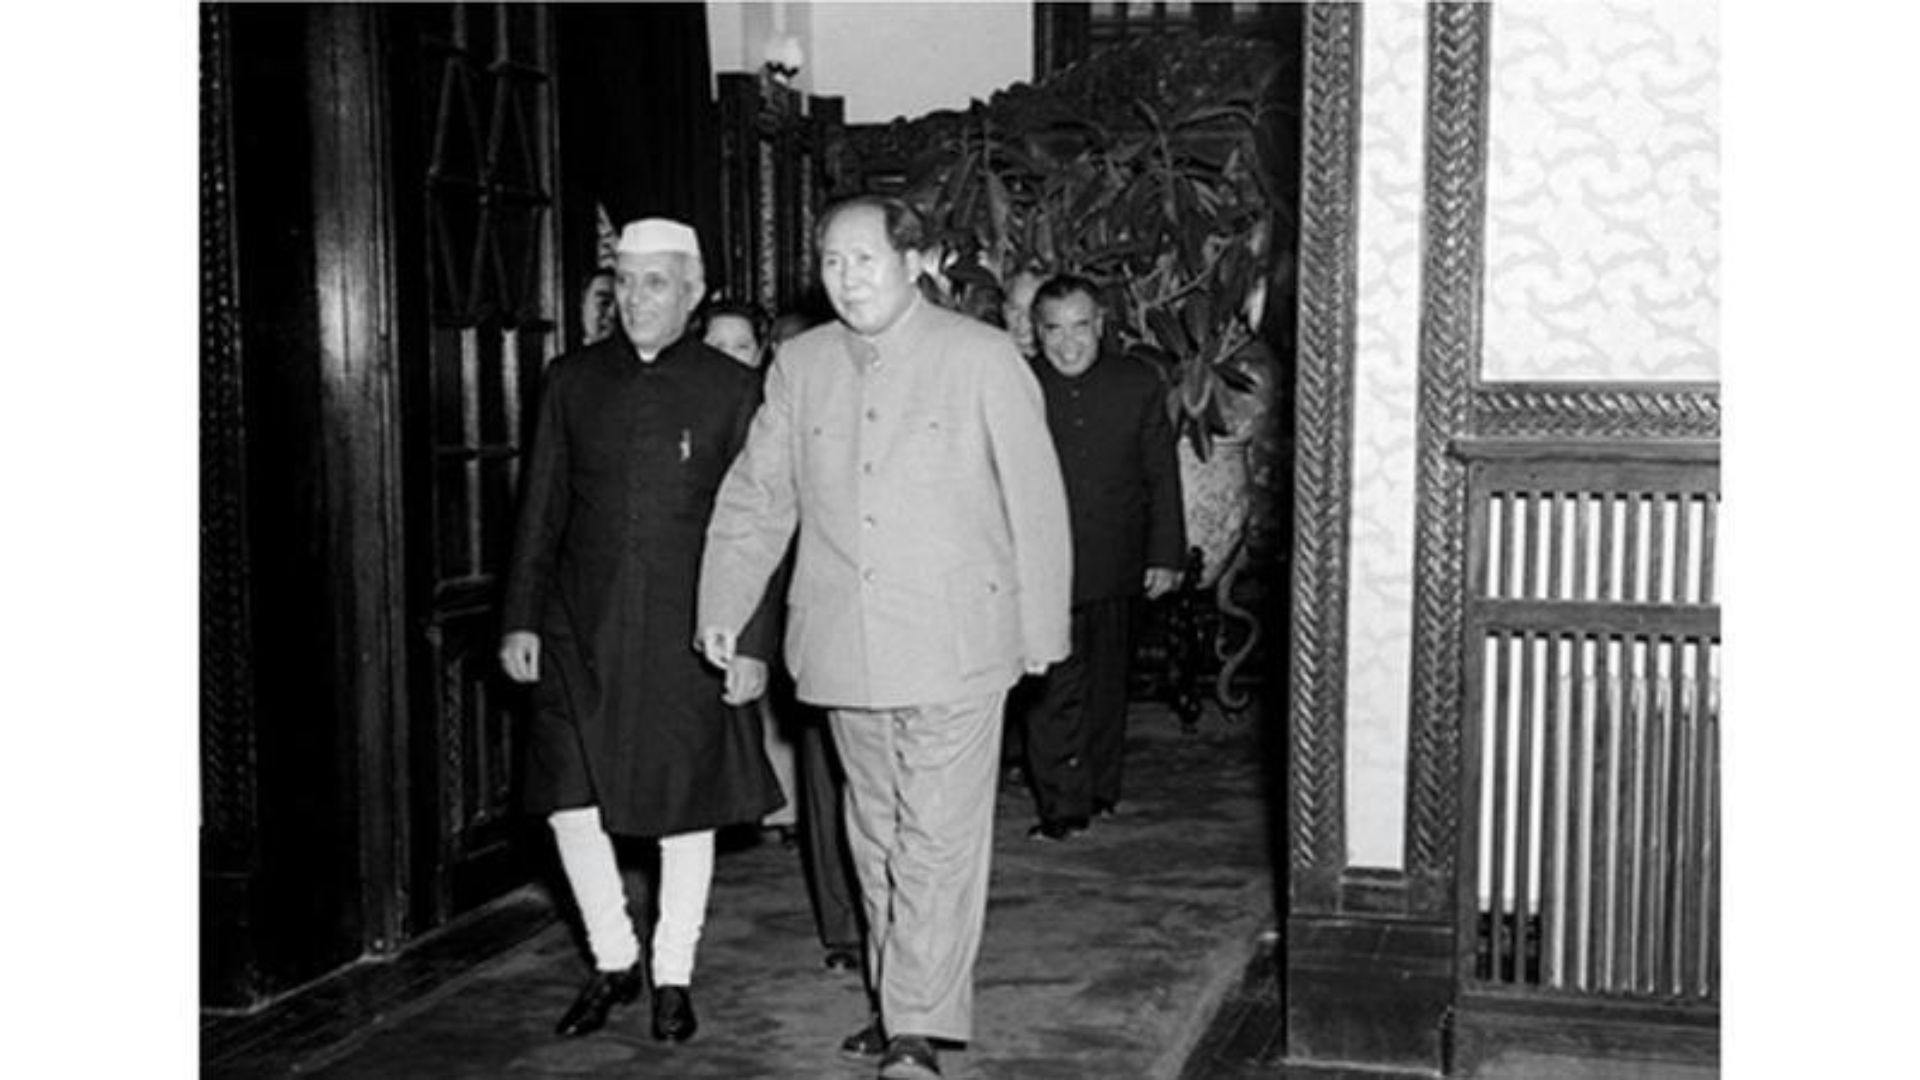 Prime Minister Nehru and Chinese Chairman Mao Zedong in Beijing